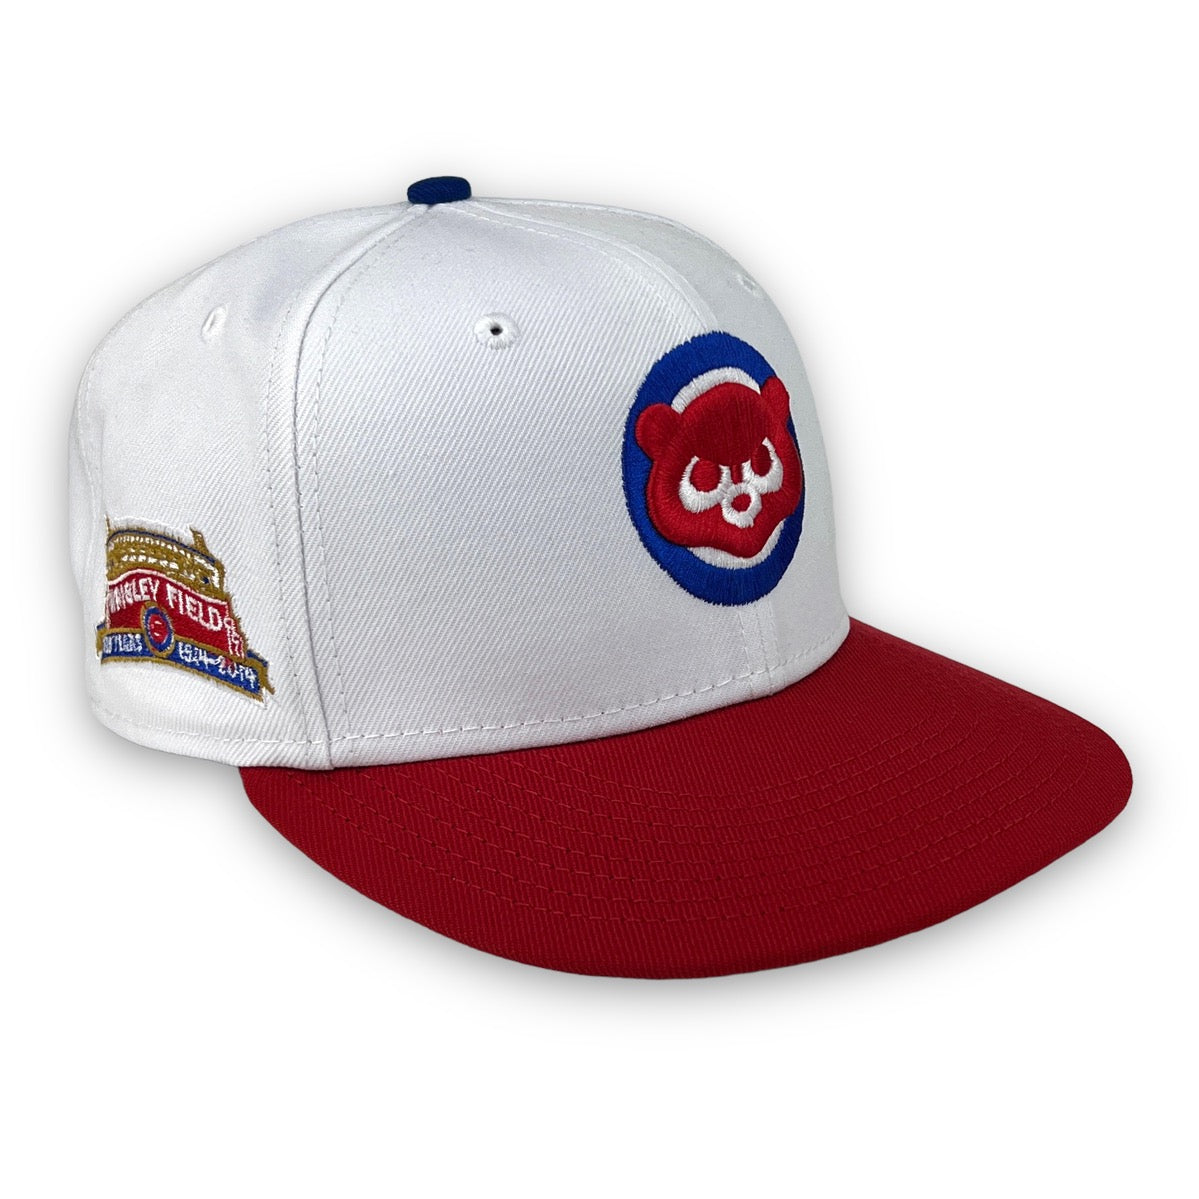 OFF-WHITE New Era Chicago Cubs Fitted Hat Blue/Red Men's - FW21 - US